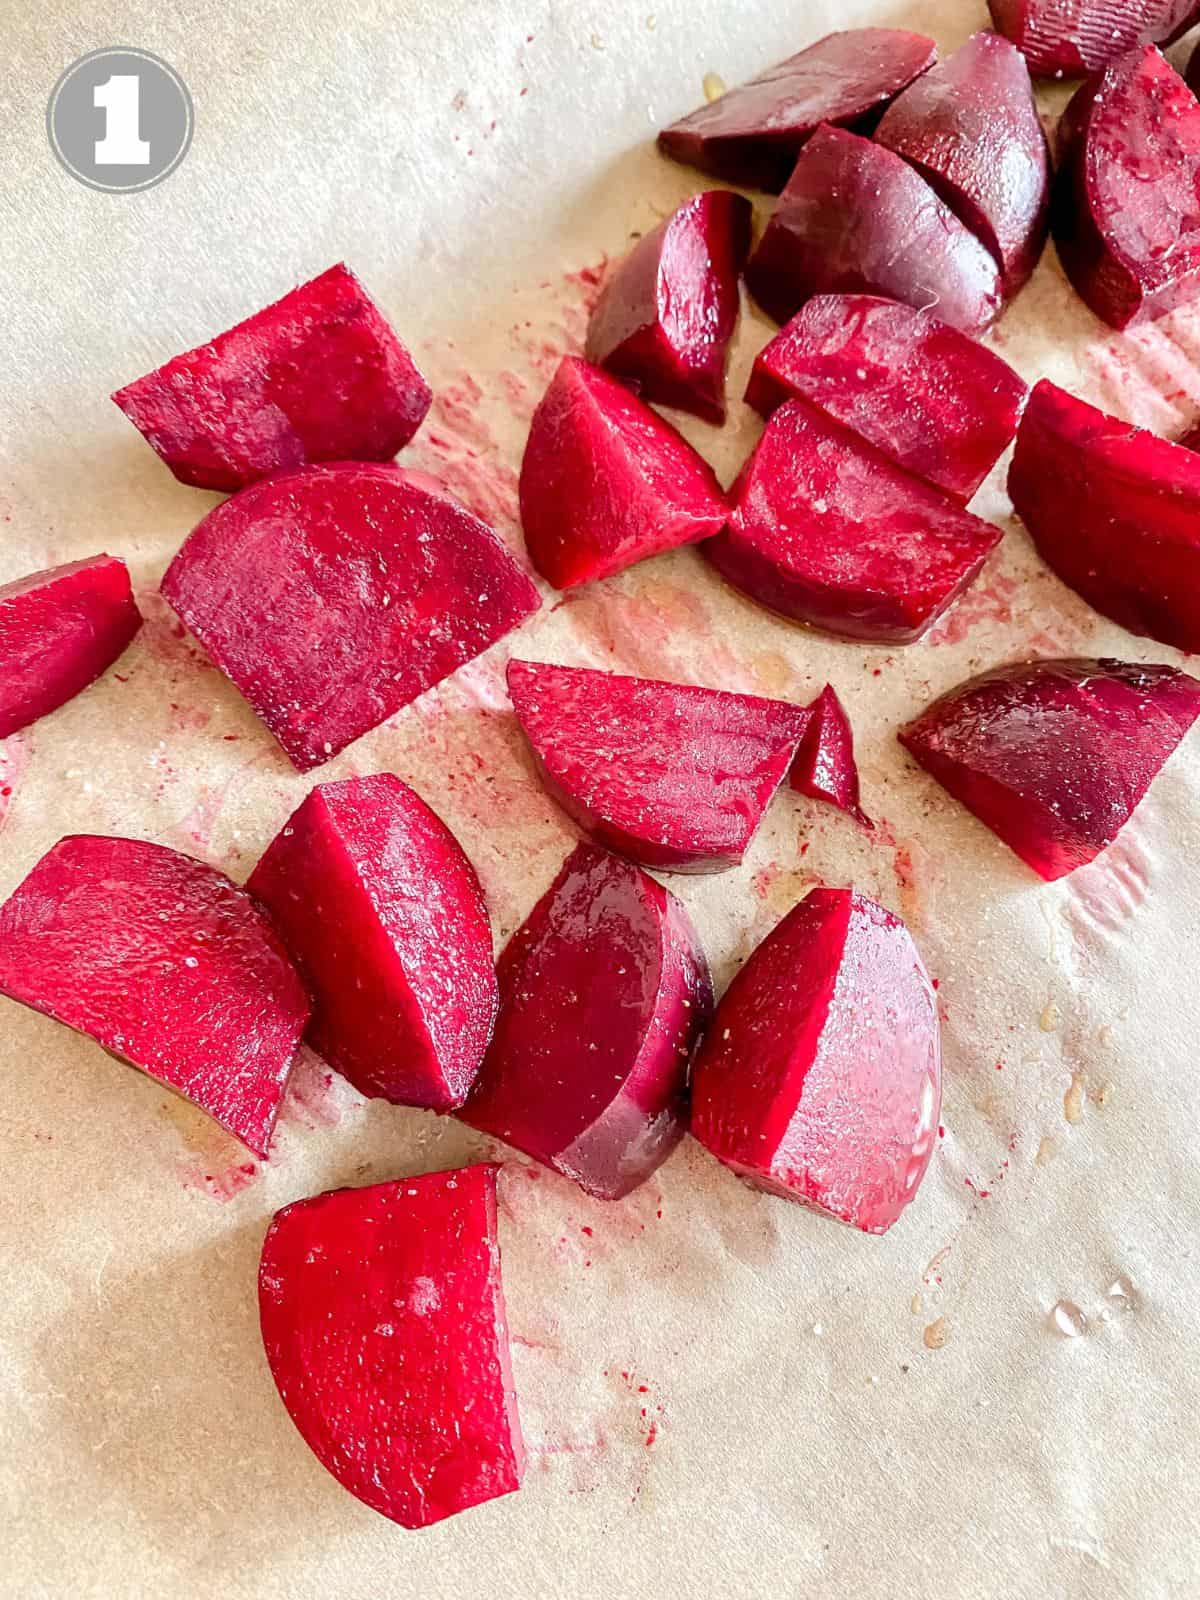 beetroot pieces on a baking tray.